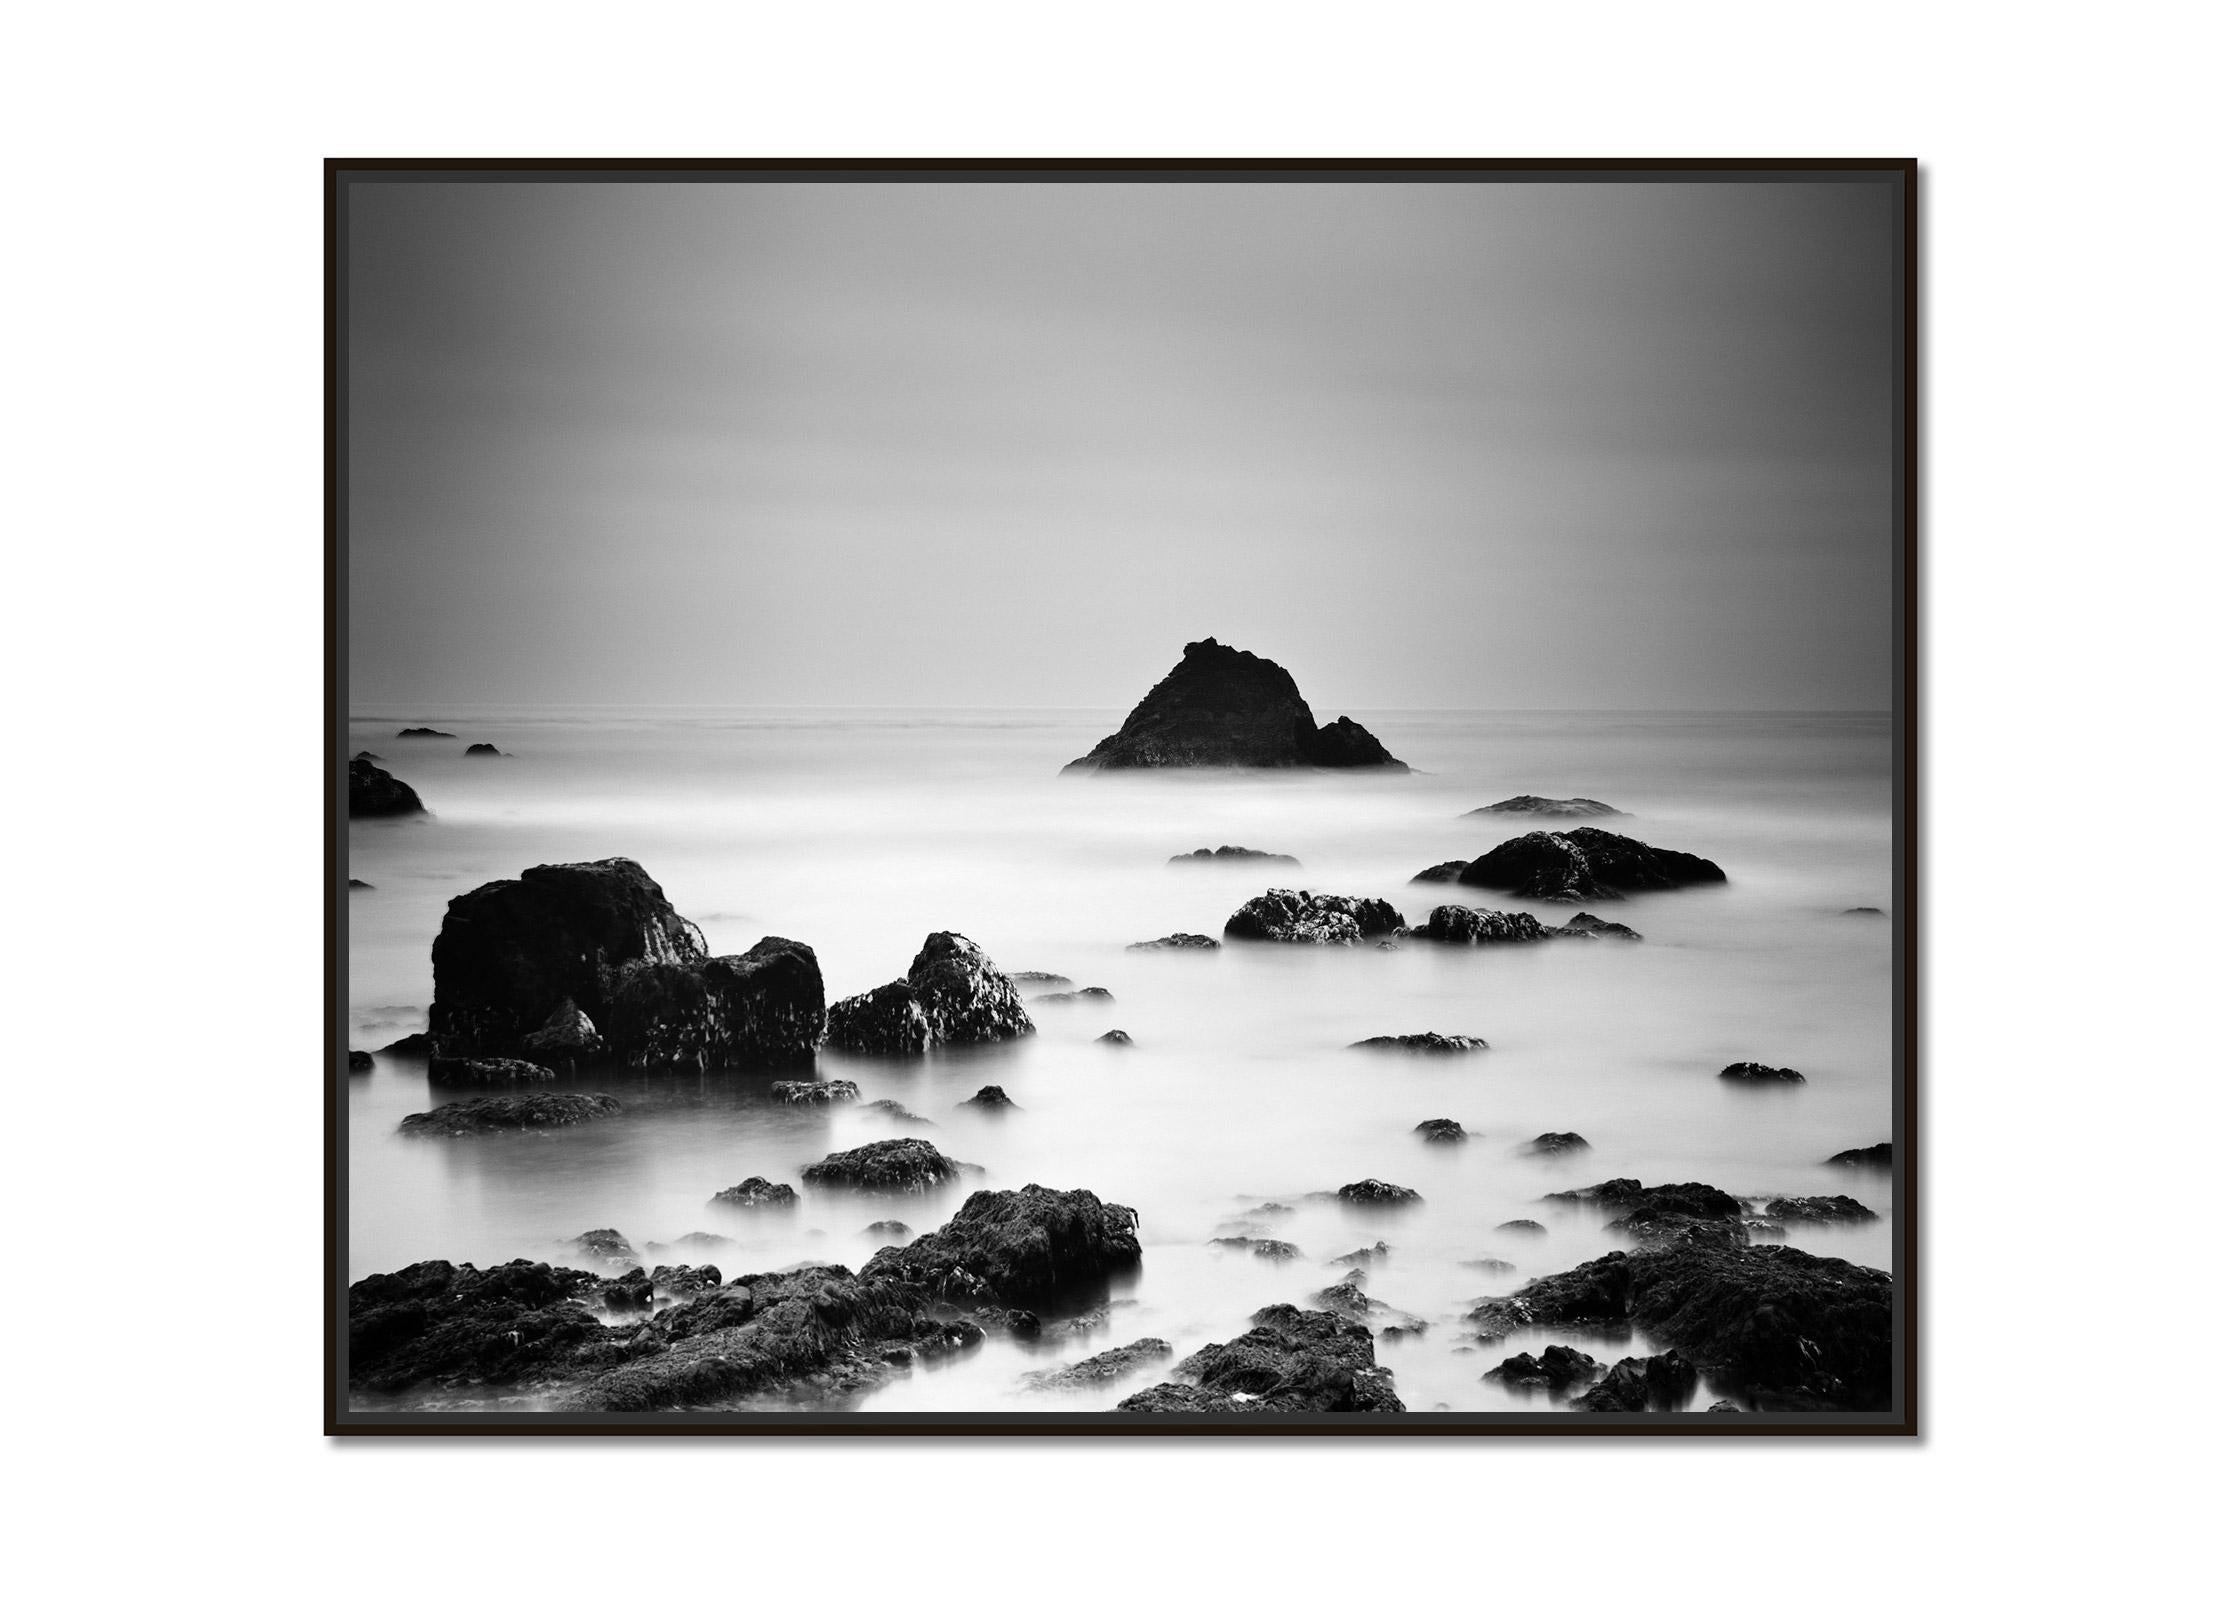 North Pacific Coast, California, USA, black and white photography, landscape - Photograph by Gerald Berghammer